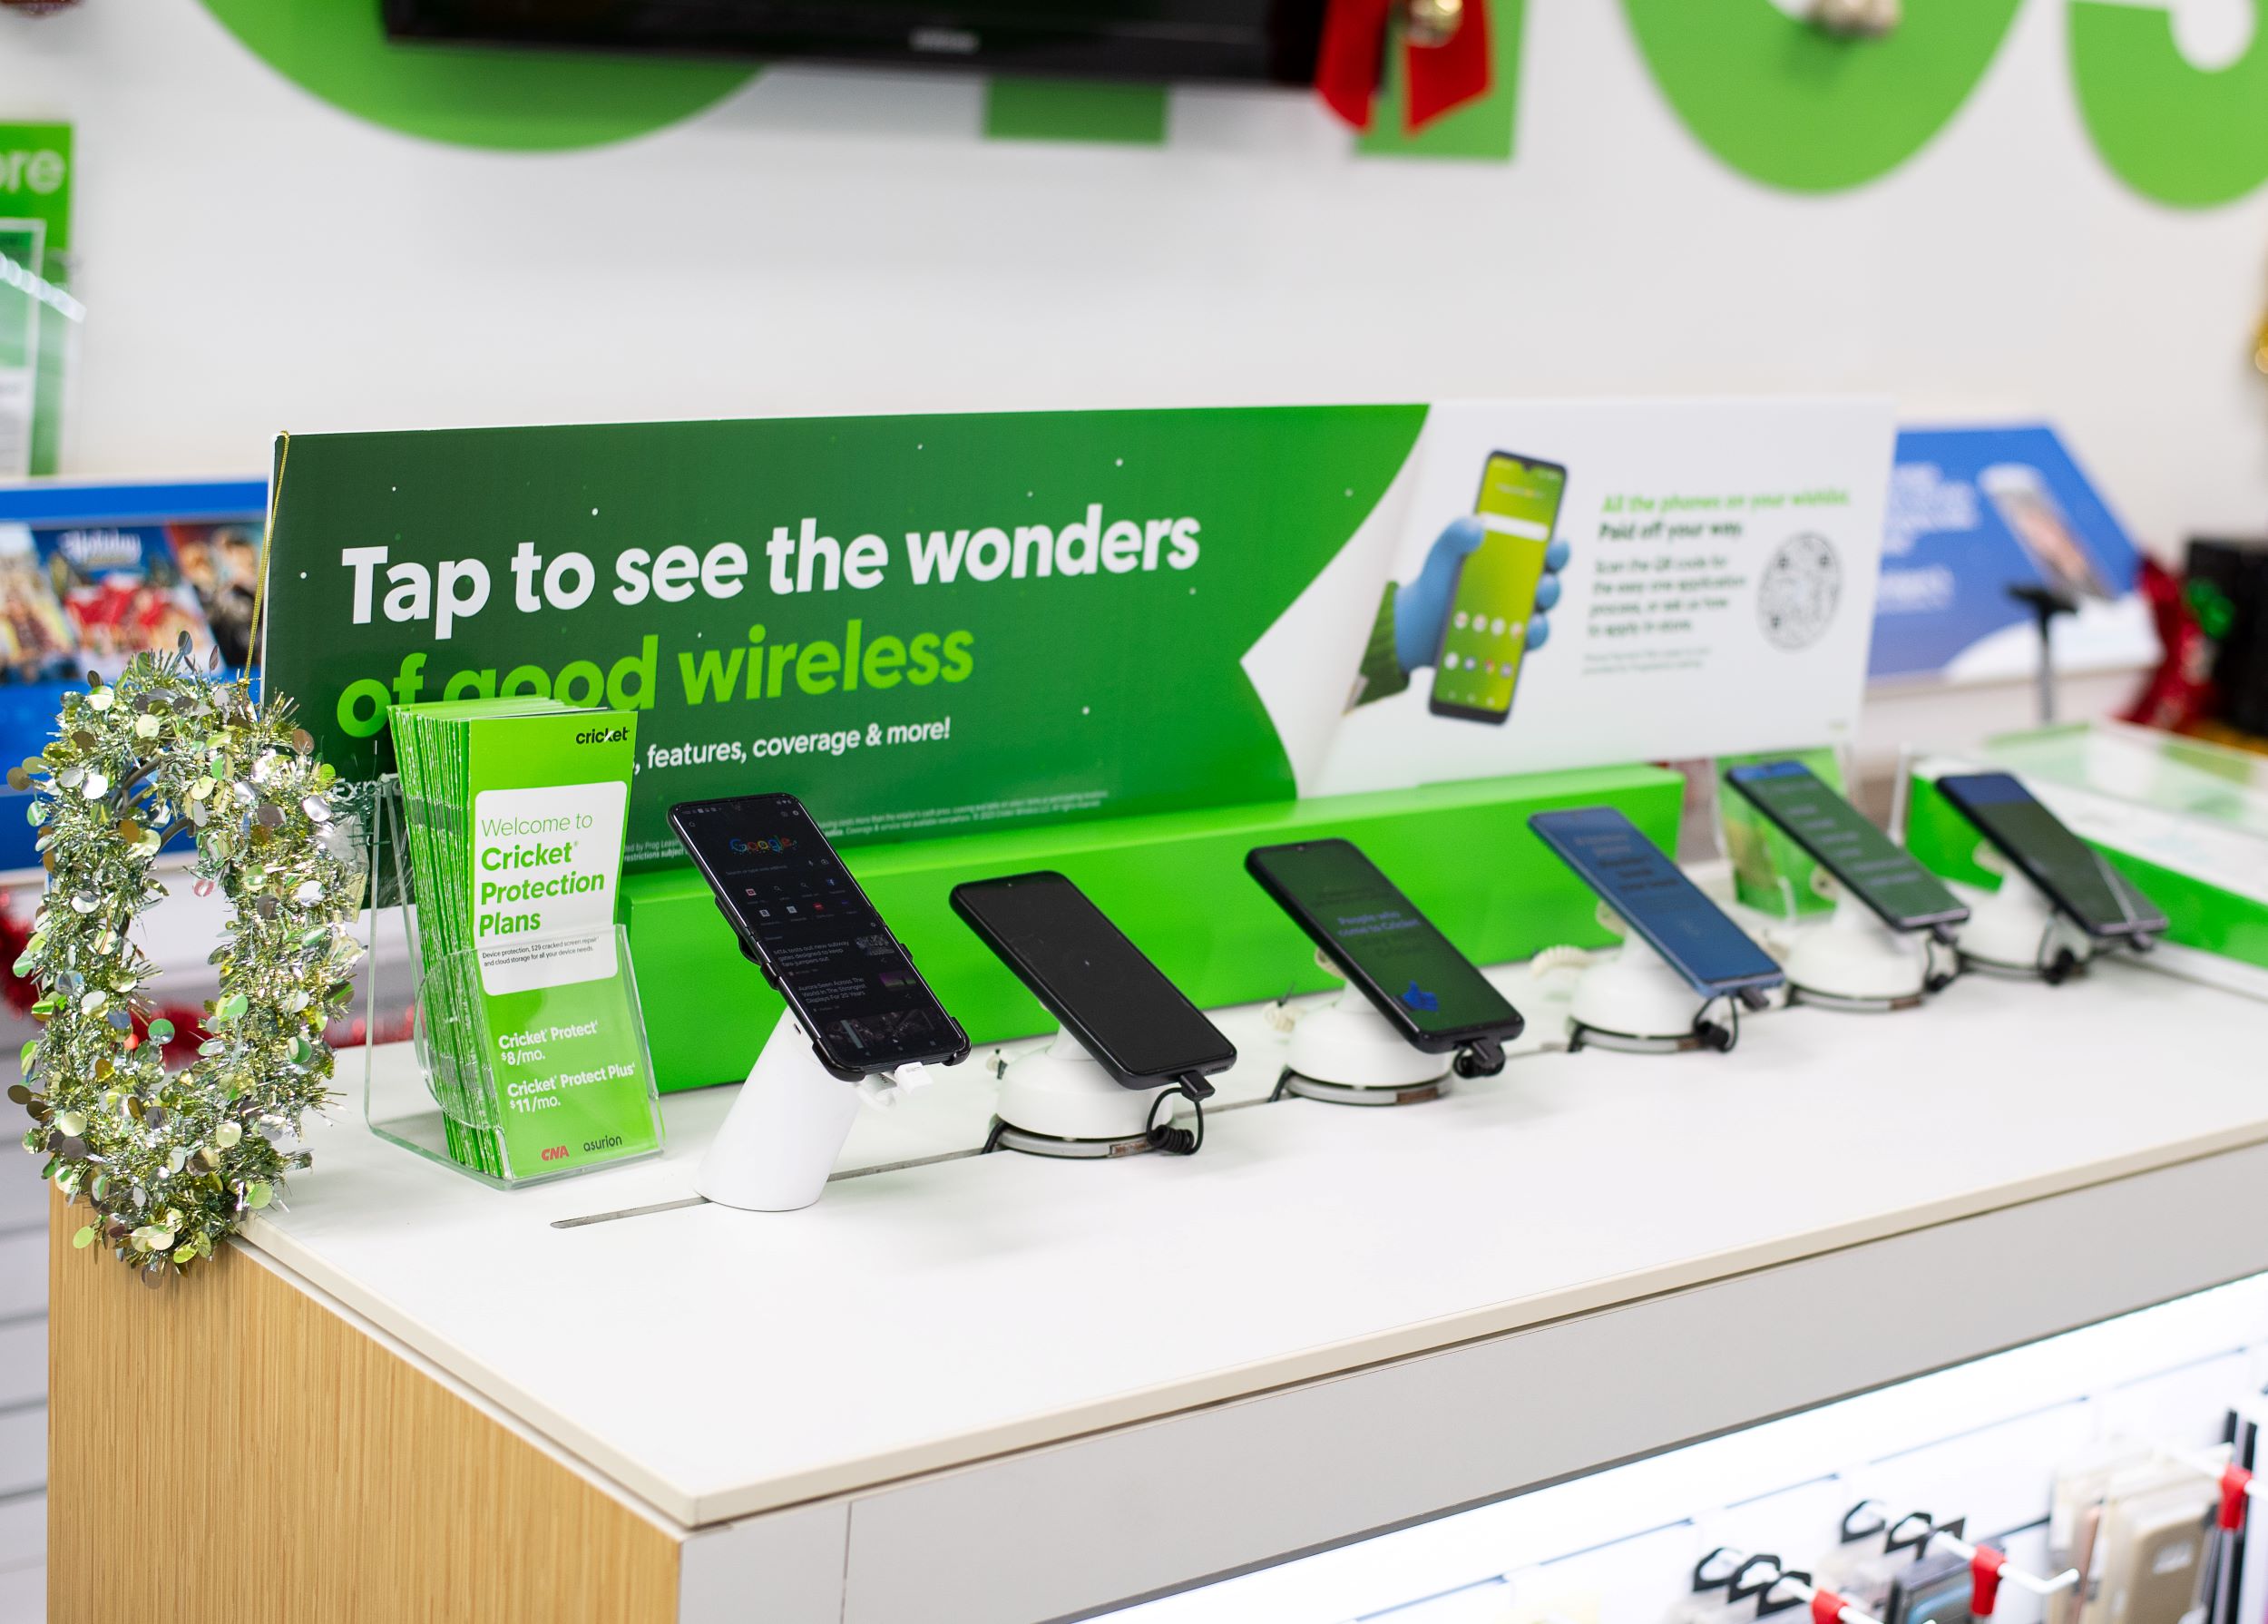 A display of smartphones on a store counter, each mounted on individual stands with informational signage about wireless plans and features in a brightly lit store.